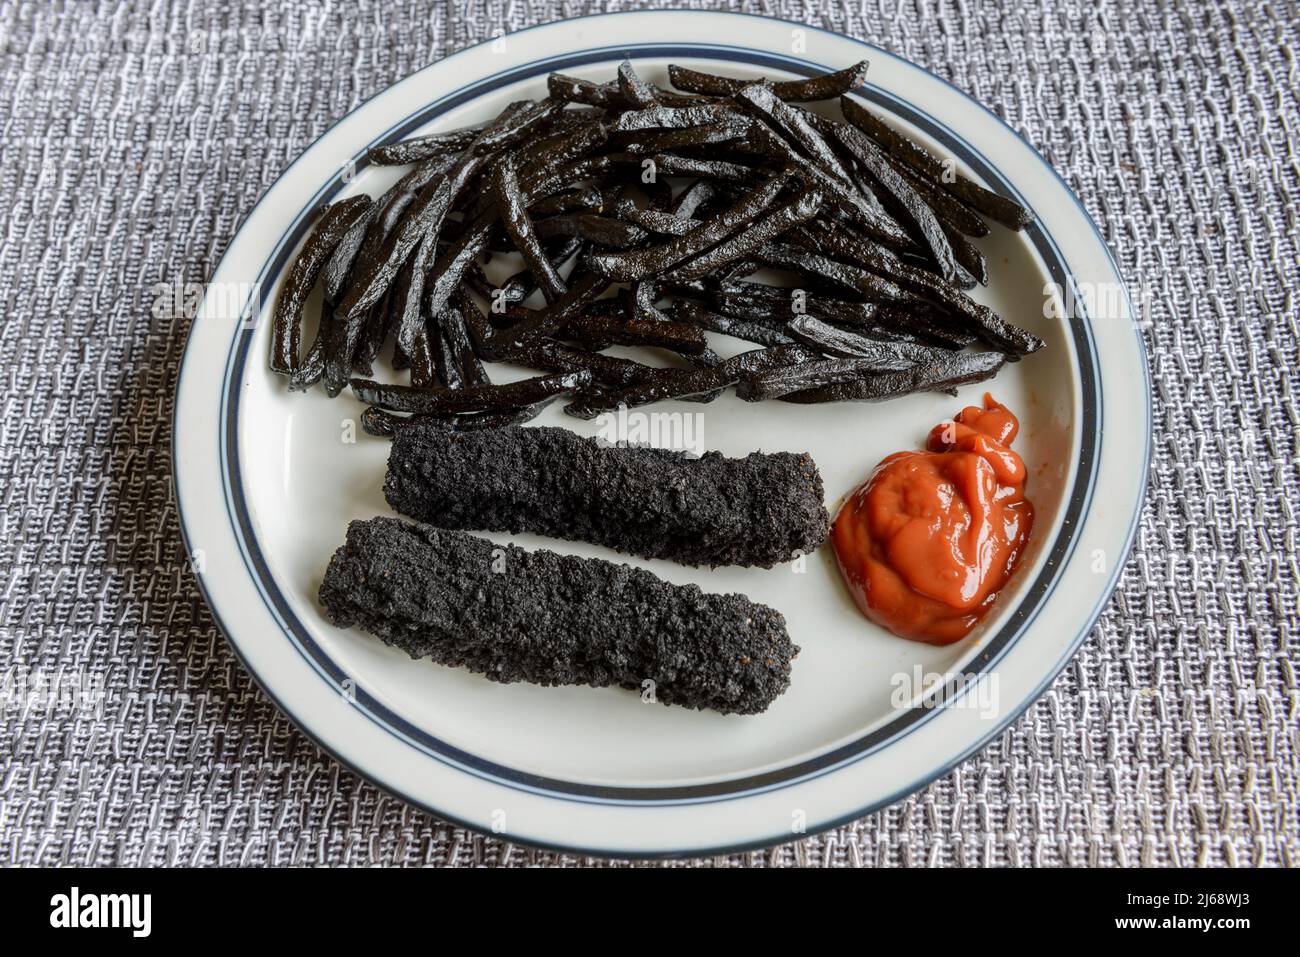 A plate of badly burnt, black, fish fingers and chips, French fries. Stock Photo